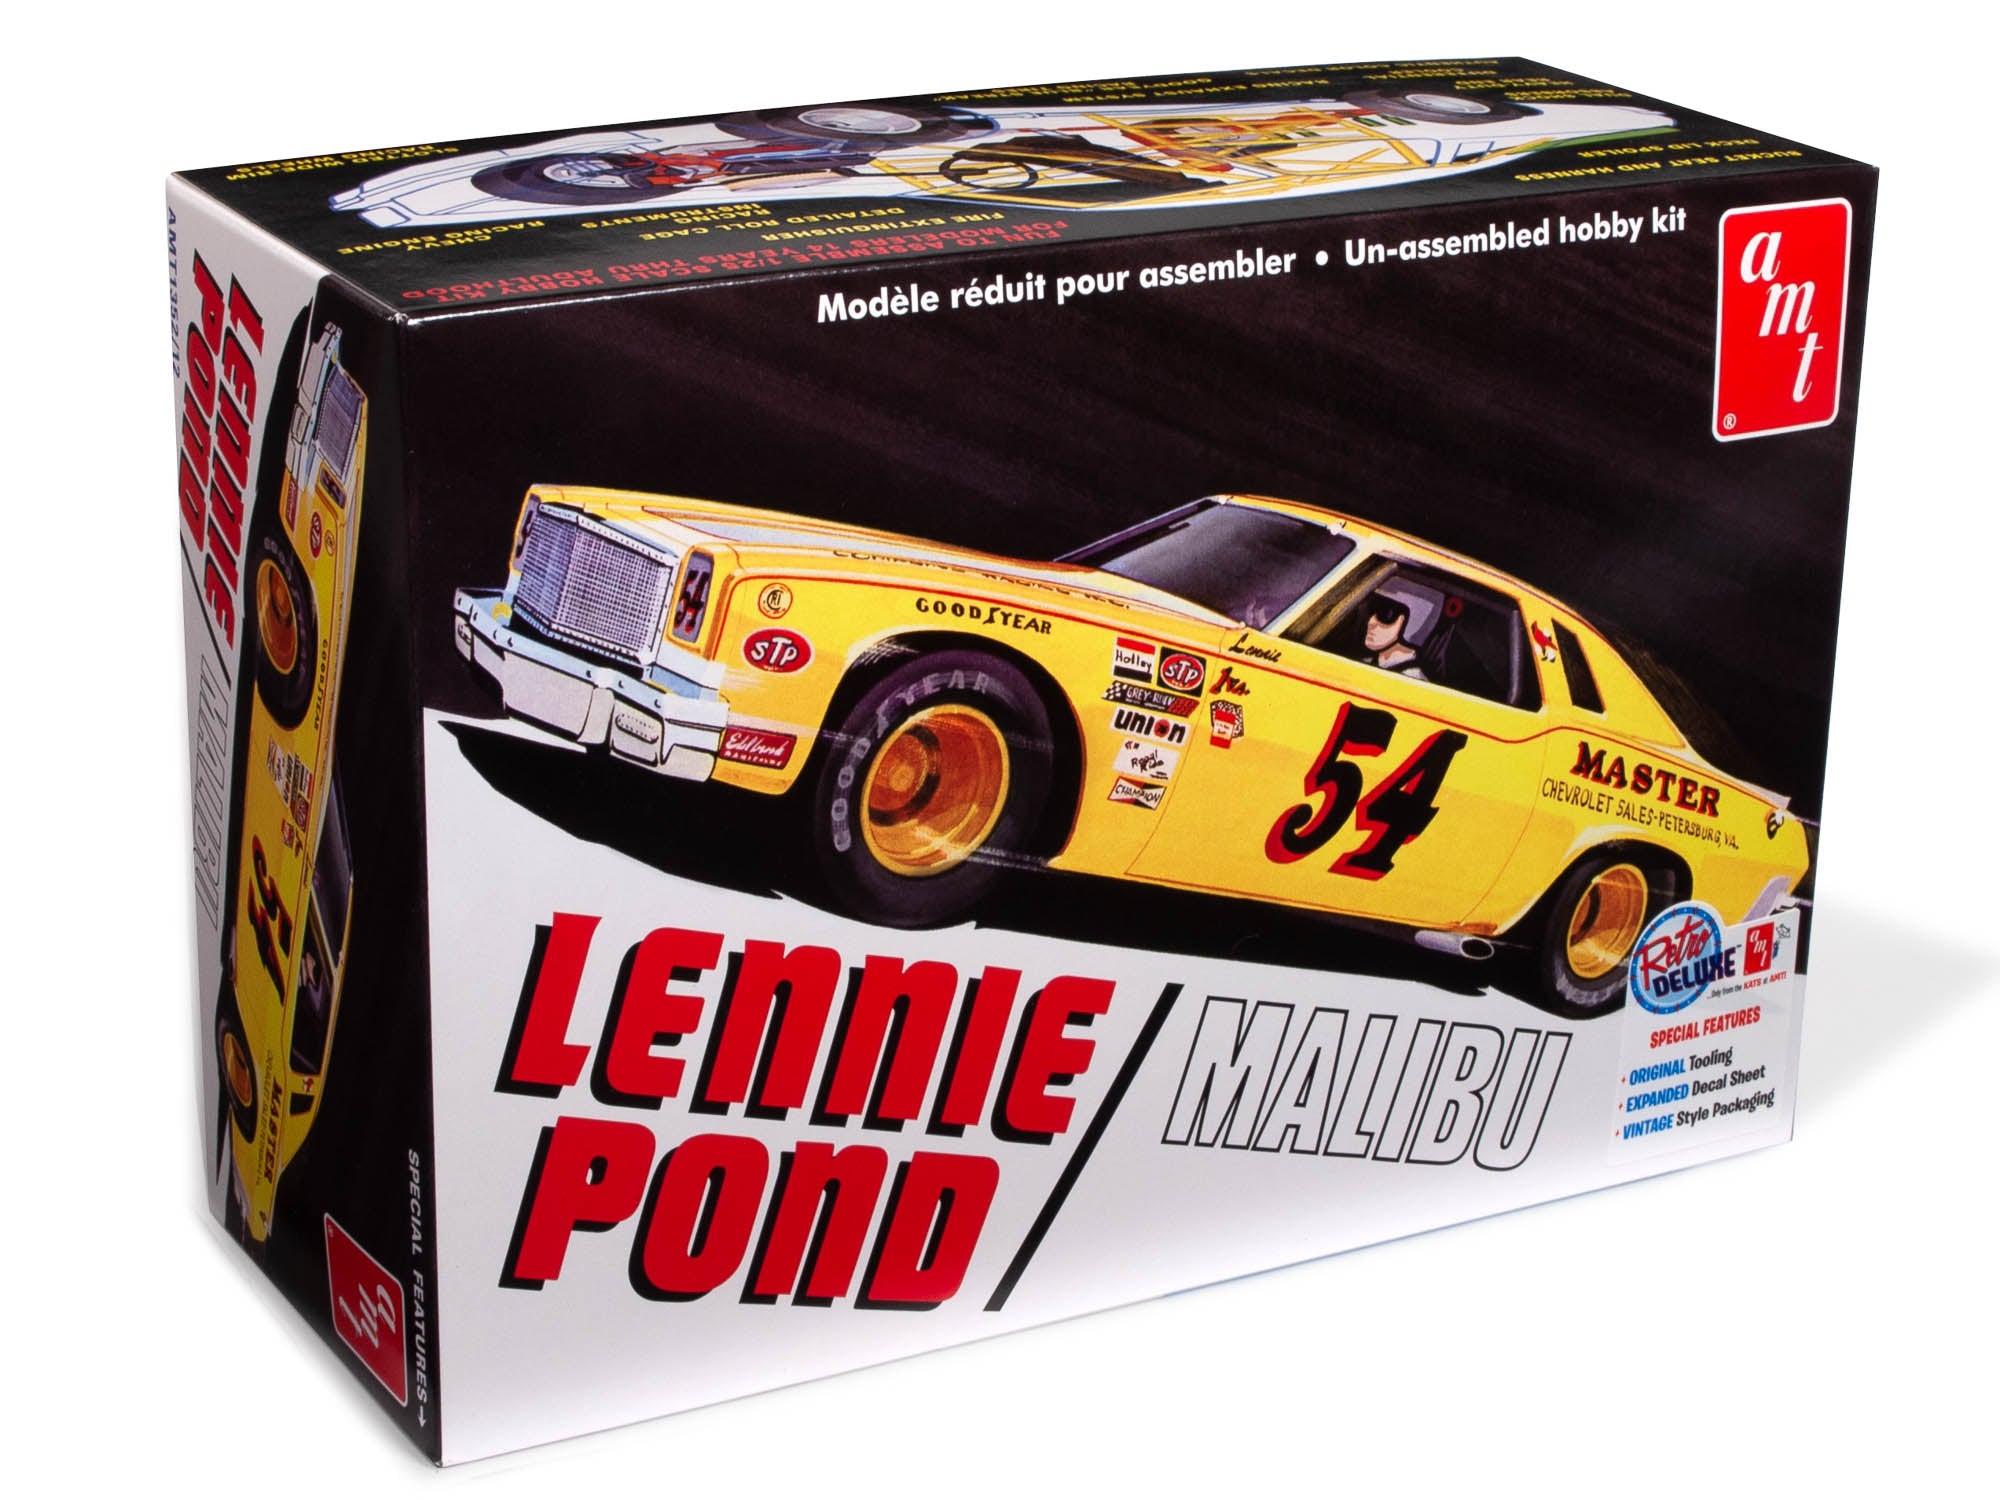 Nascar model kits, by Monogram, revell, AMT and more..